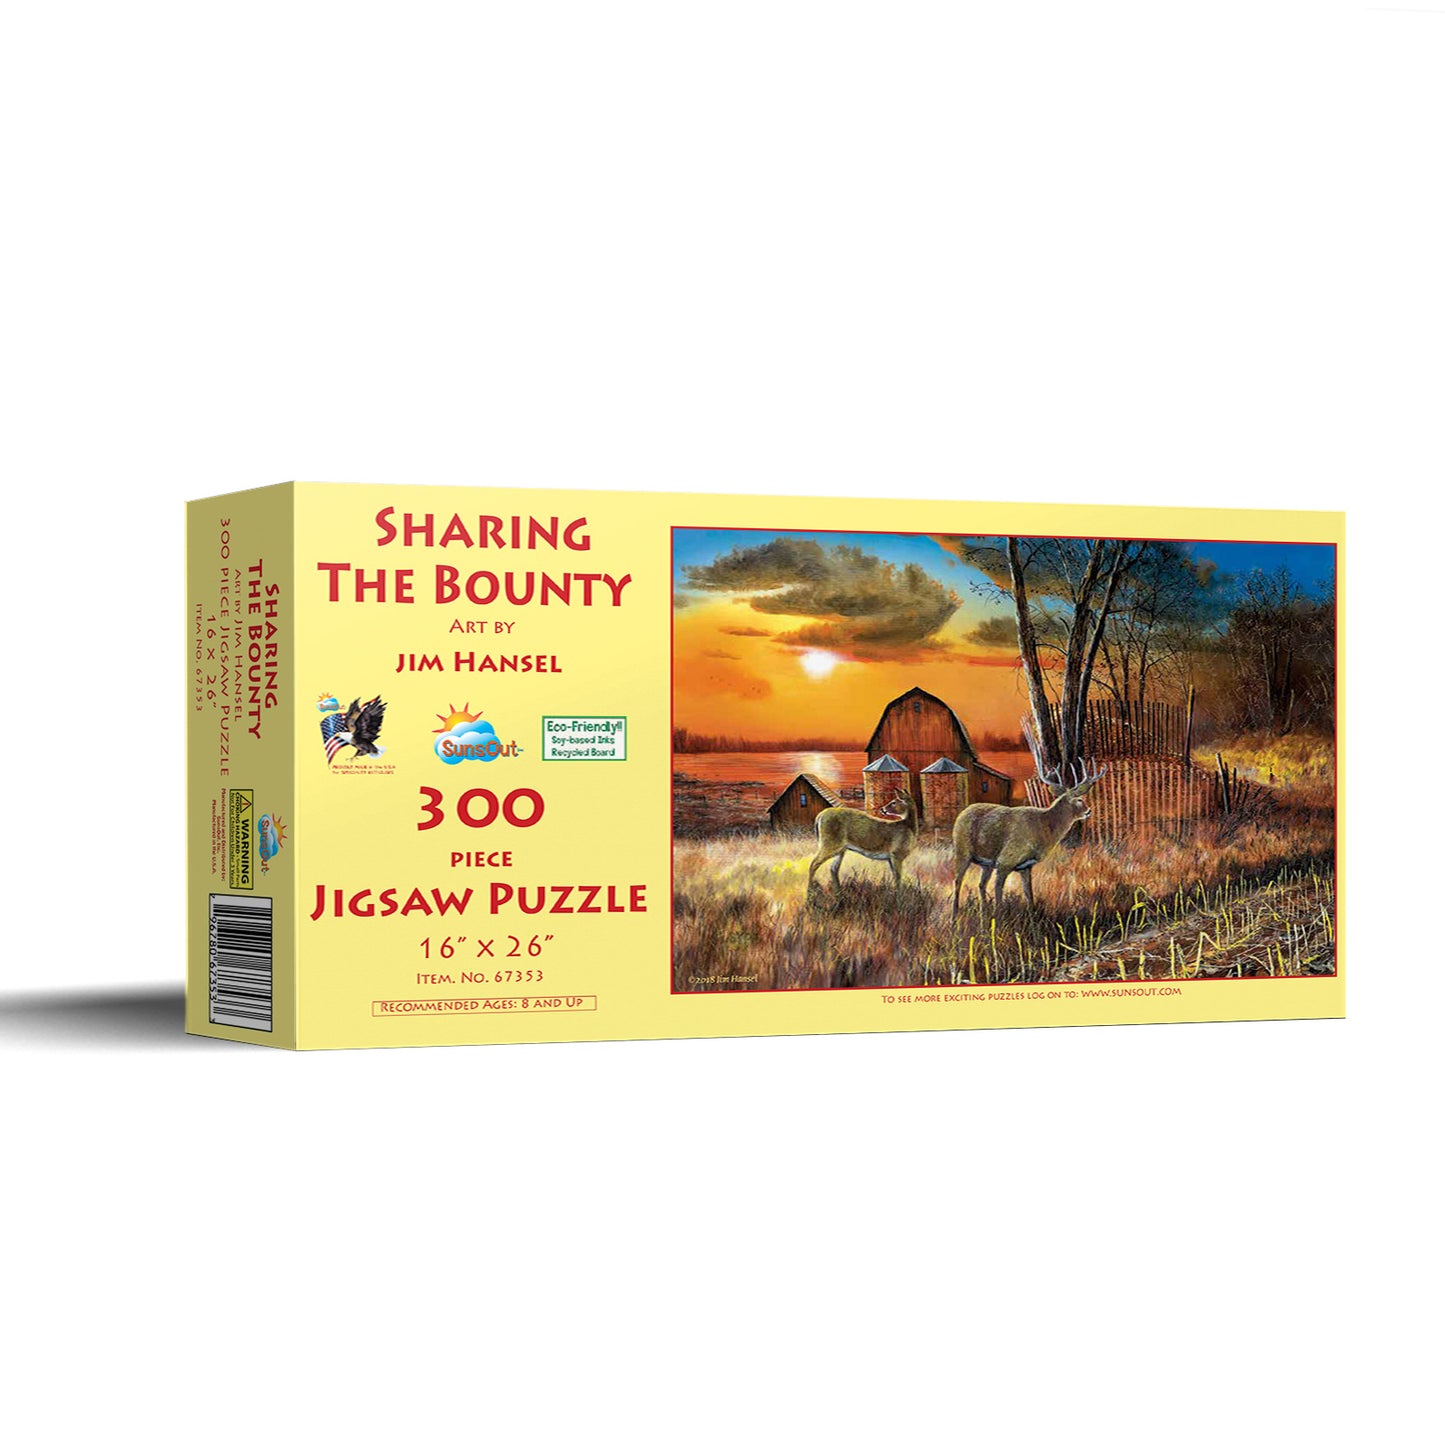 Sharing the Bounty - 300 Piece Jigsaw Puzzle